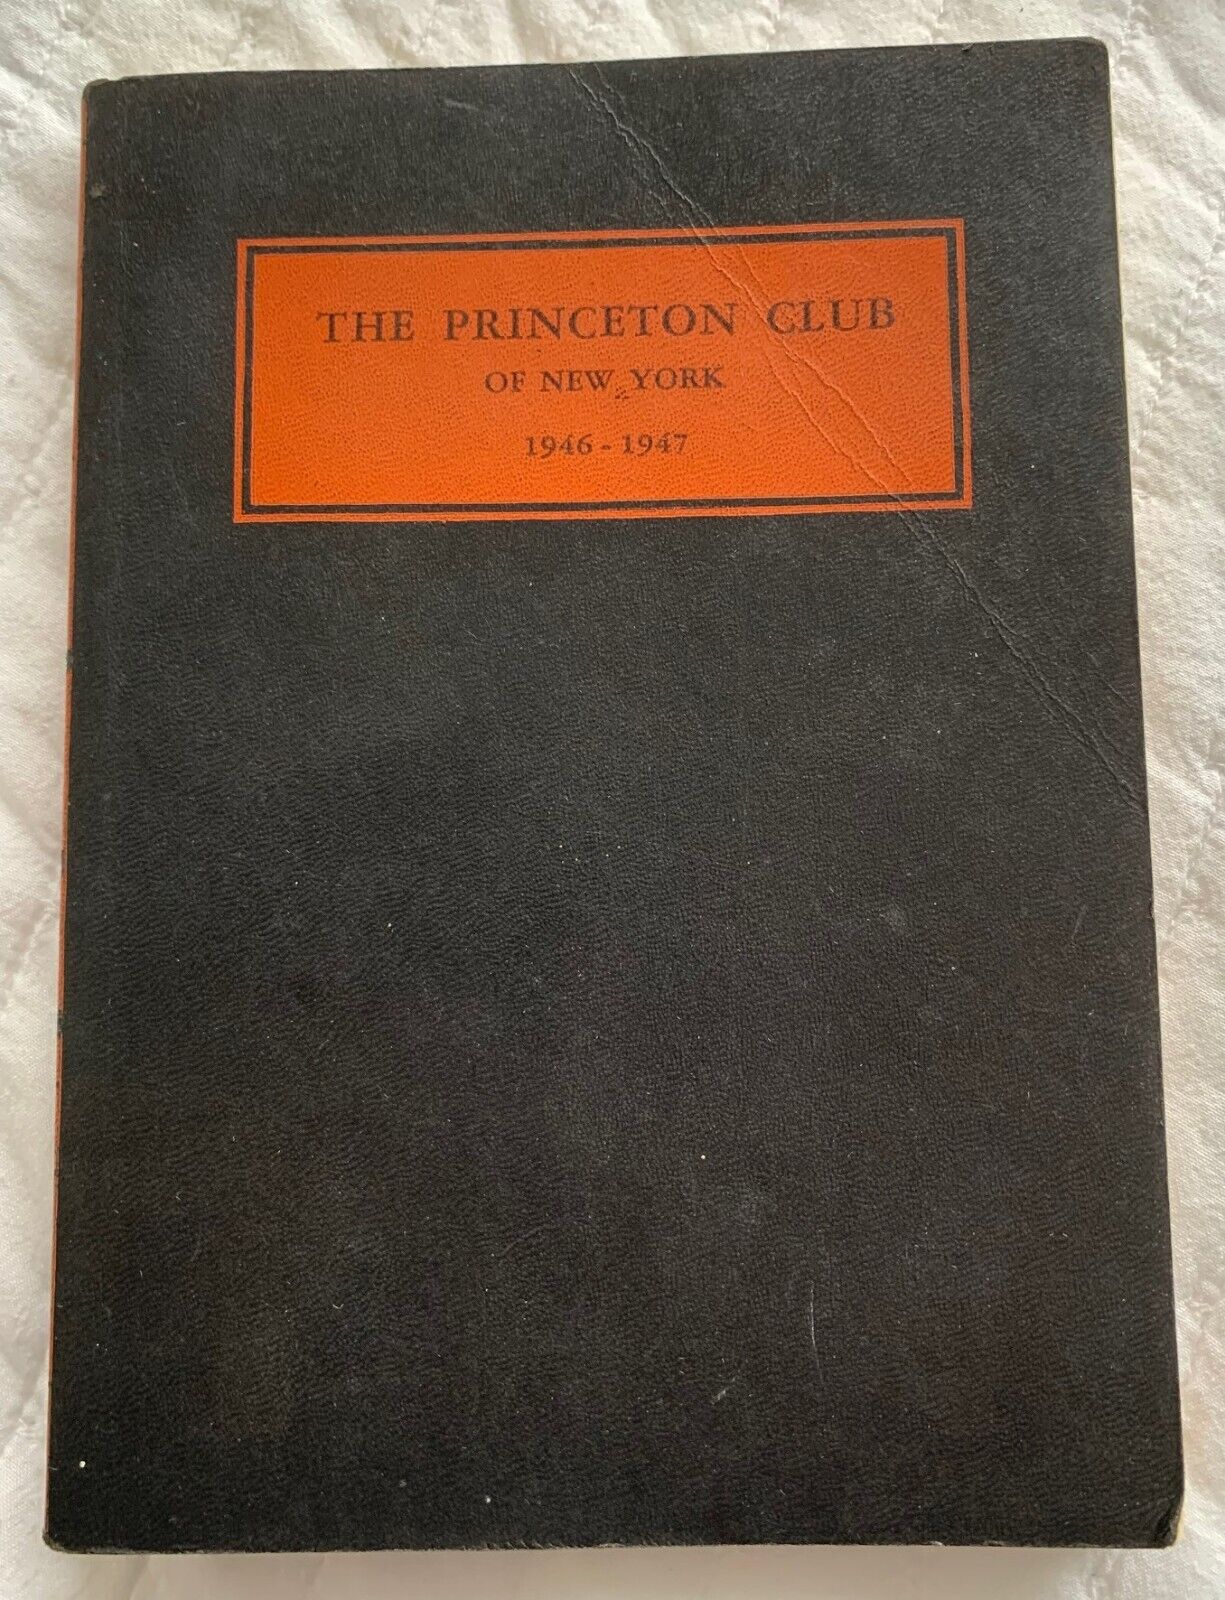 1946-47 The Princeton Club of New York Officers, Members, Constitution and Rules